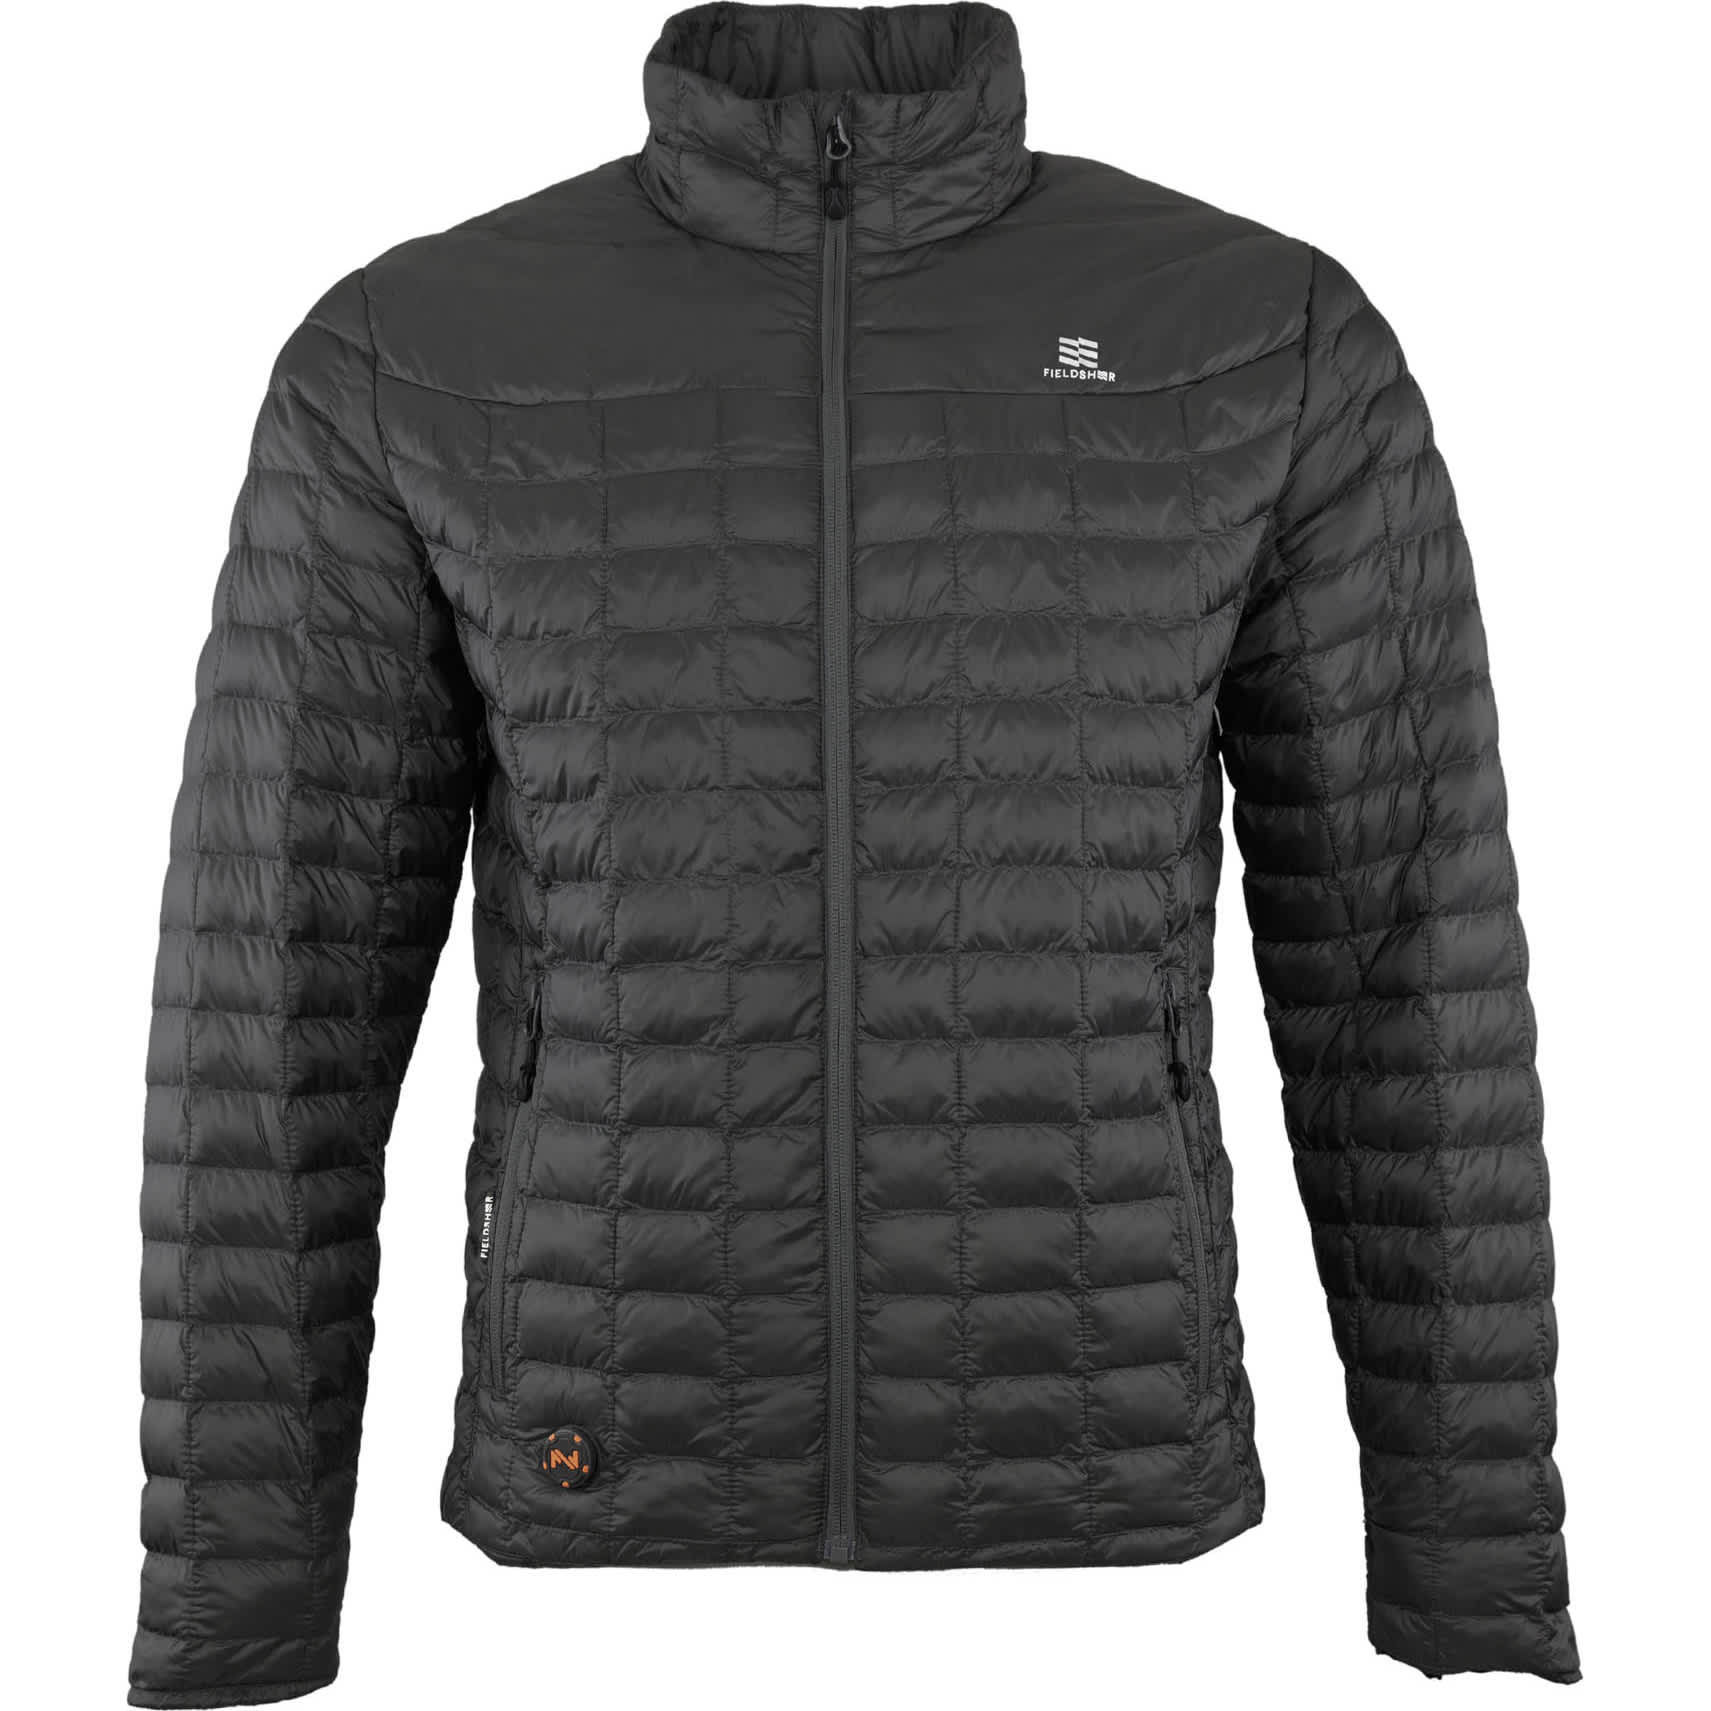 MOBILE WARMING Backcountry Men’s Heated Jacket Grey (Size: M)